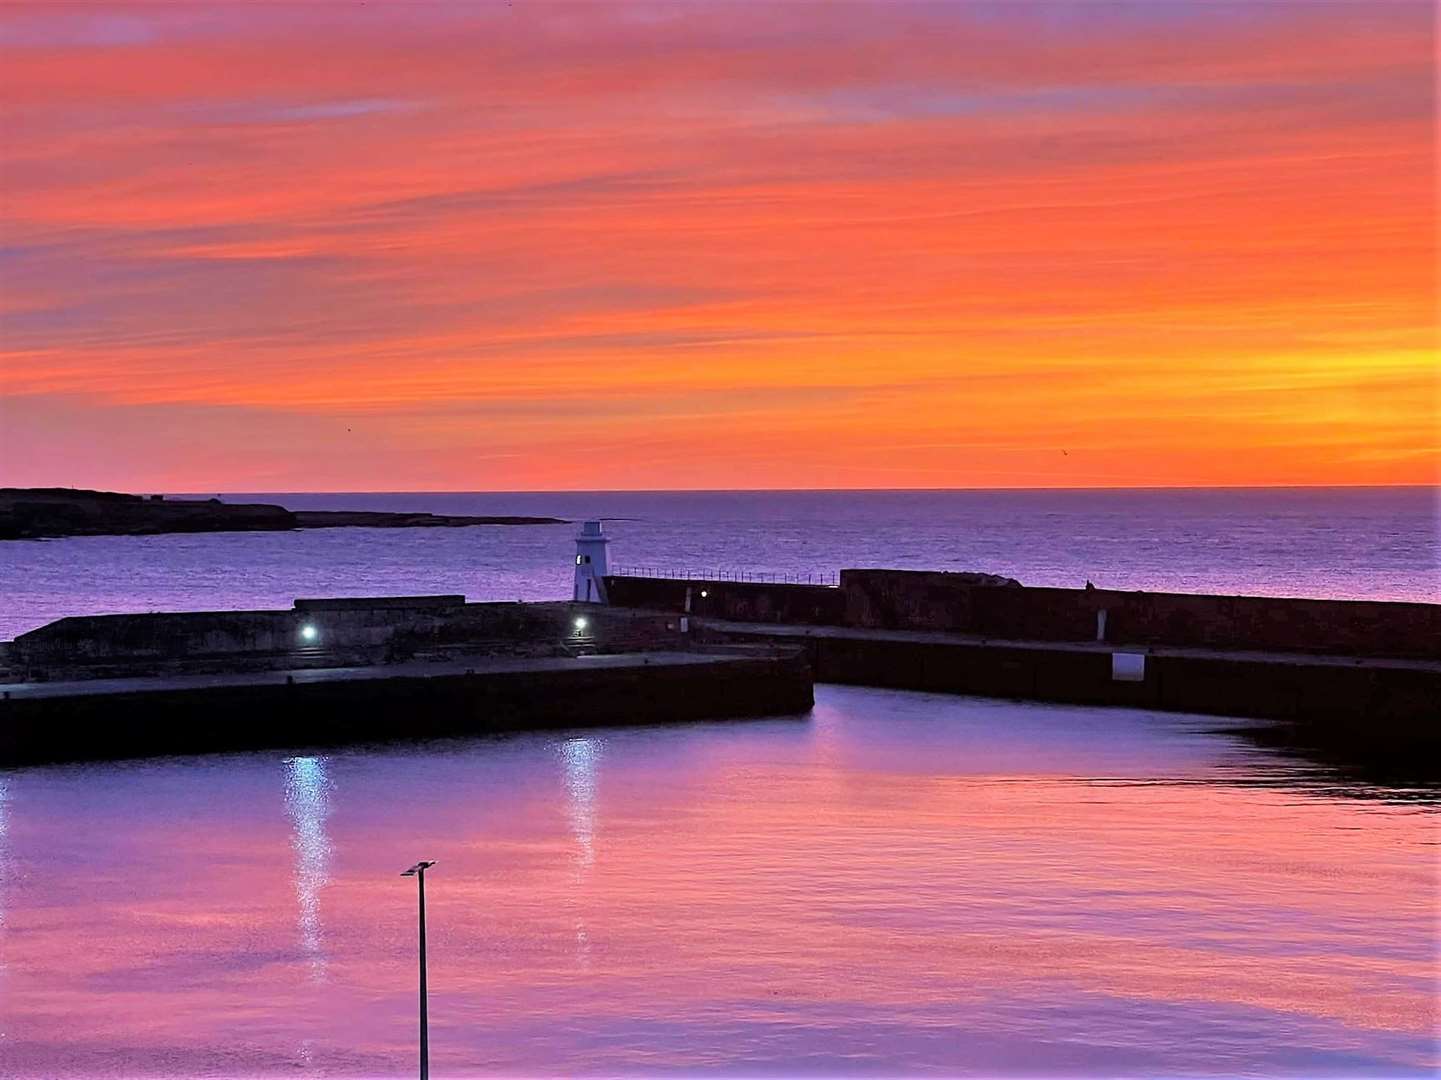 View over Wick harbour shared on Ian and Eve's Facebook page.